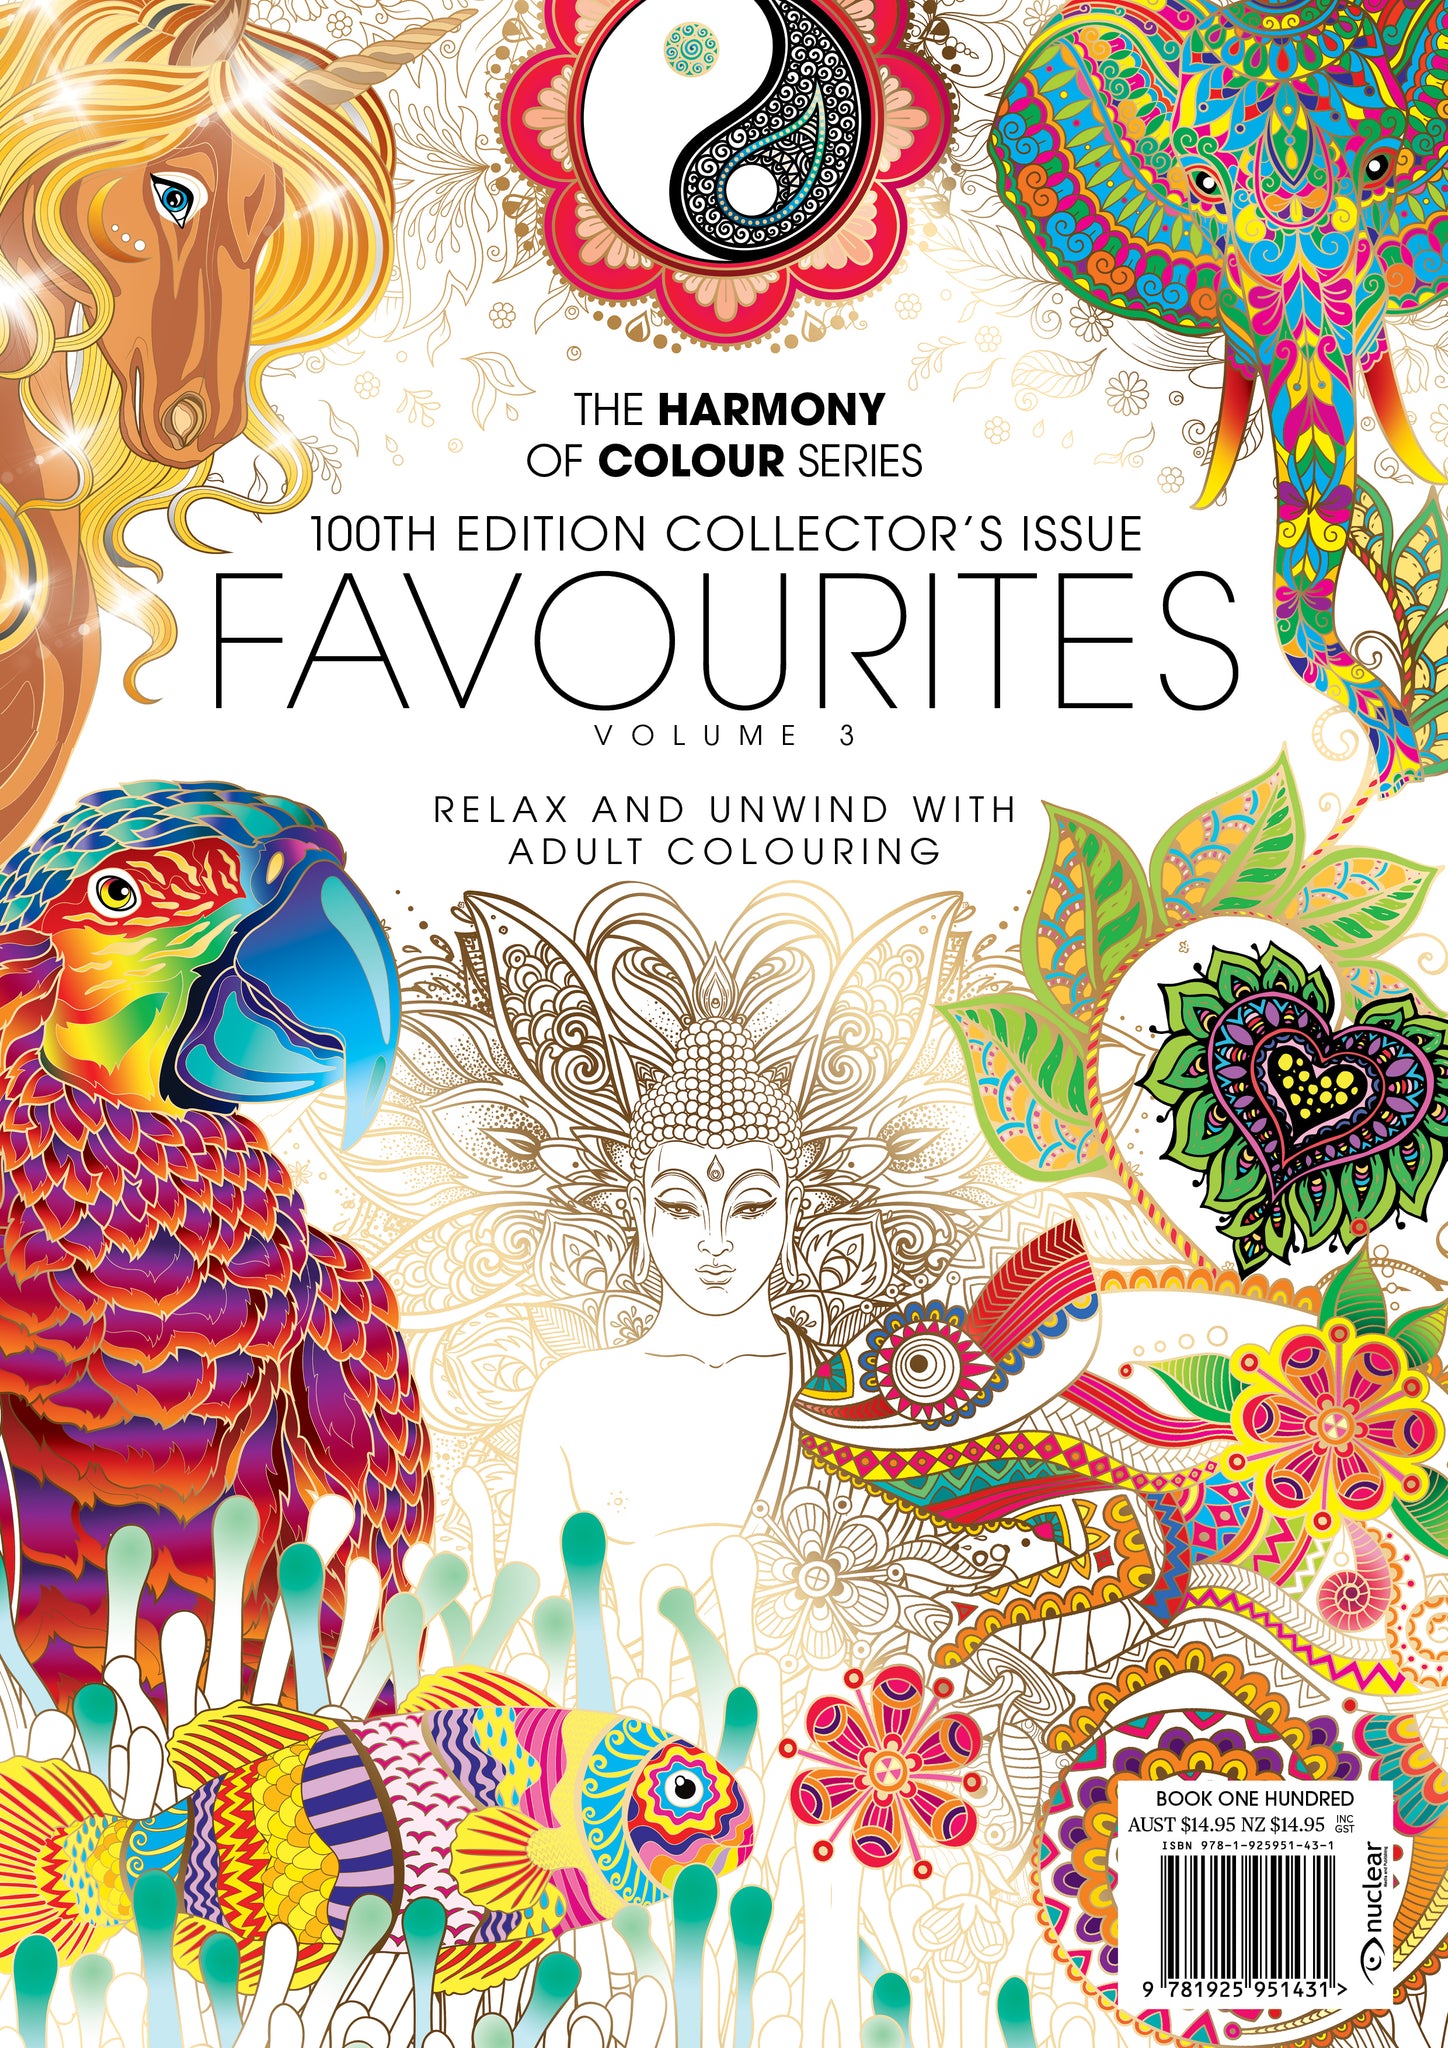 100. Harmony of Colour Book One Hundred: Favourites III (PRINTABLE DIGITAL EDITION ALSO AVAILABLE!)